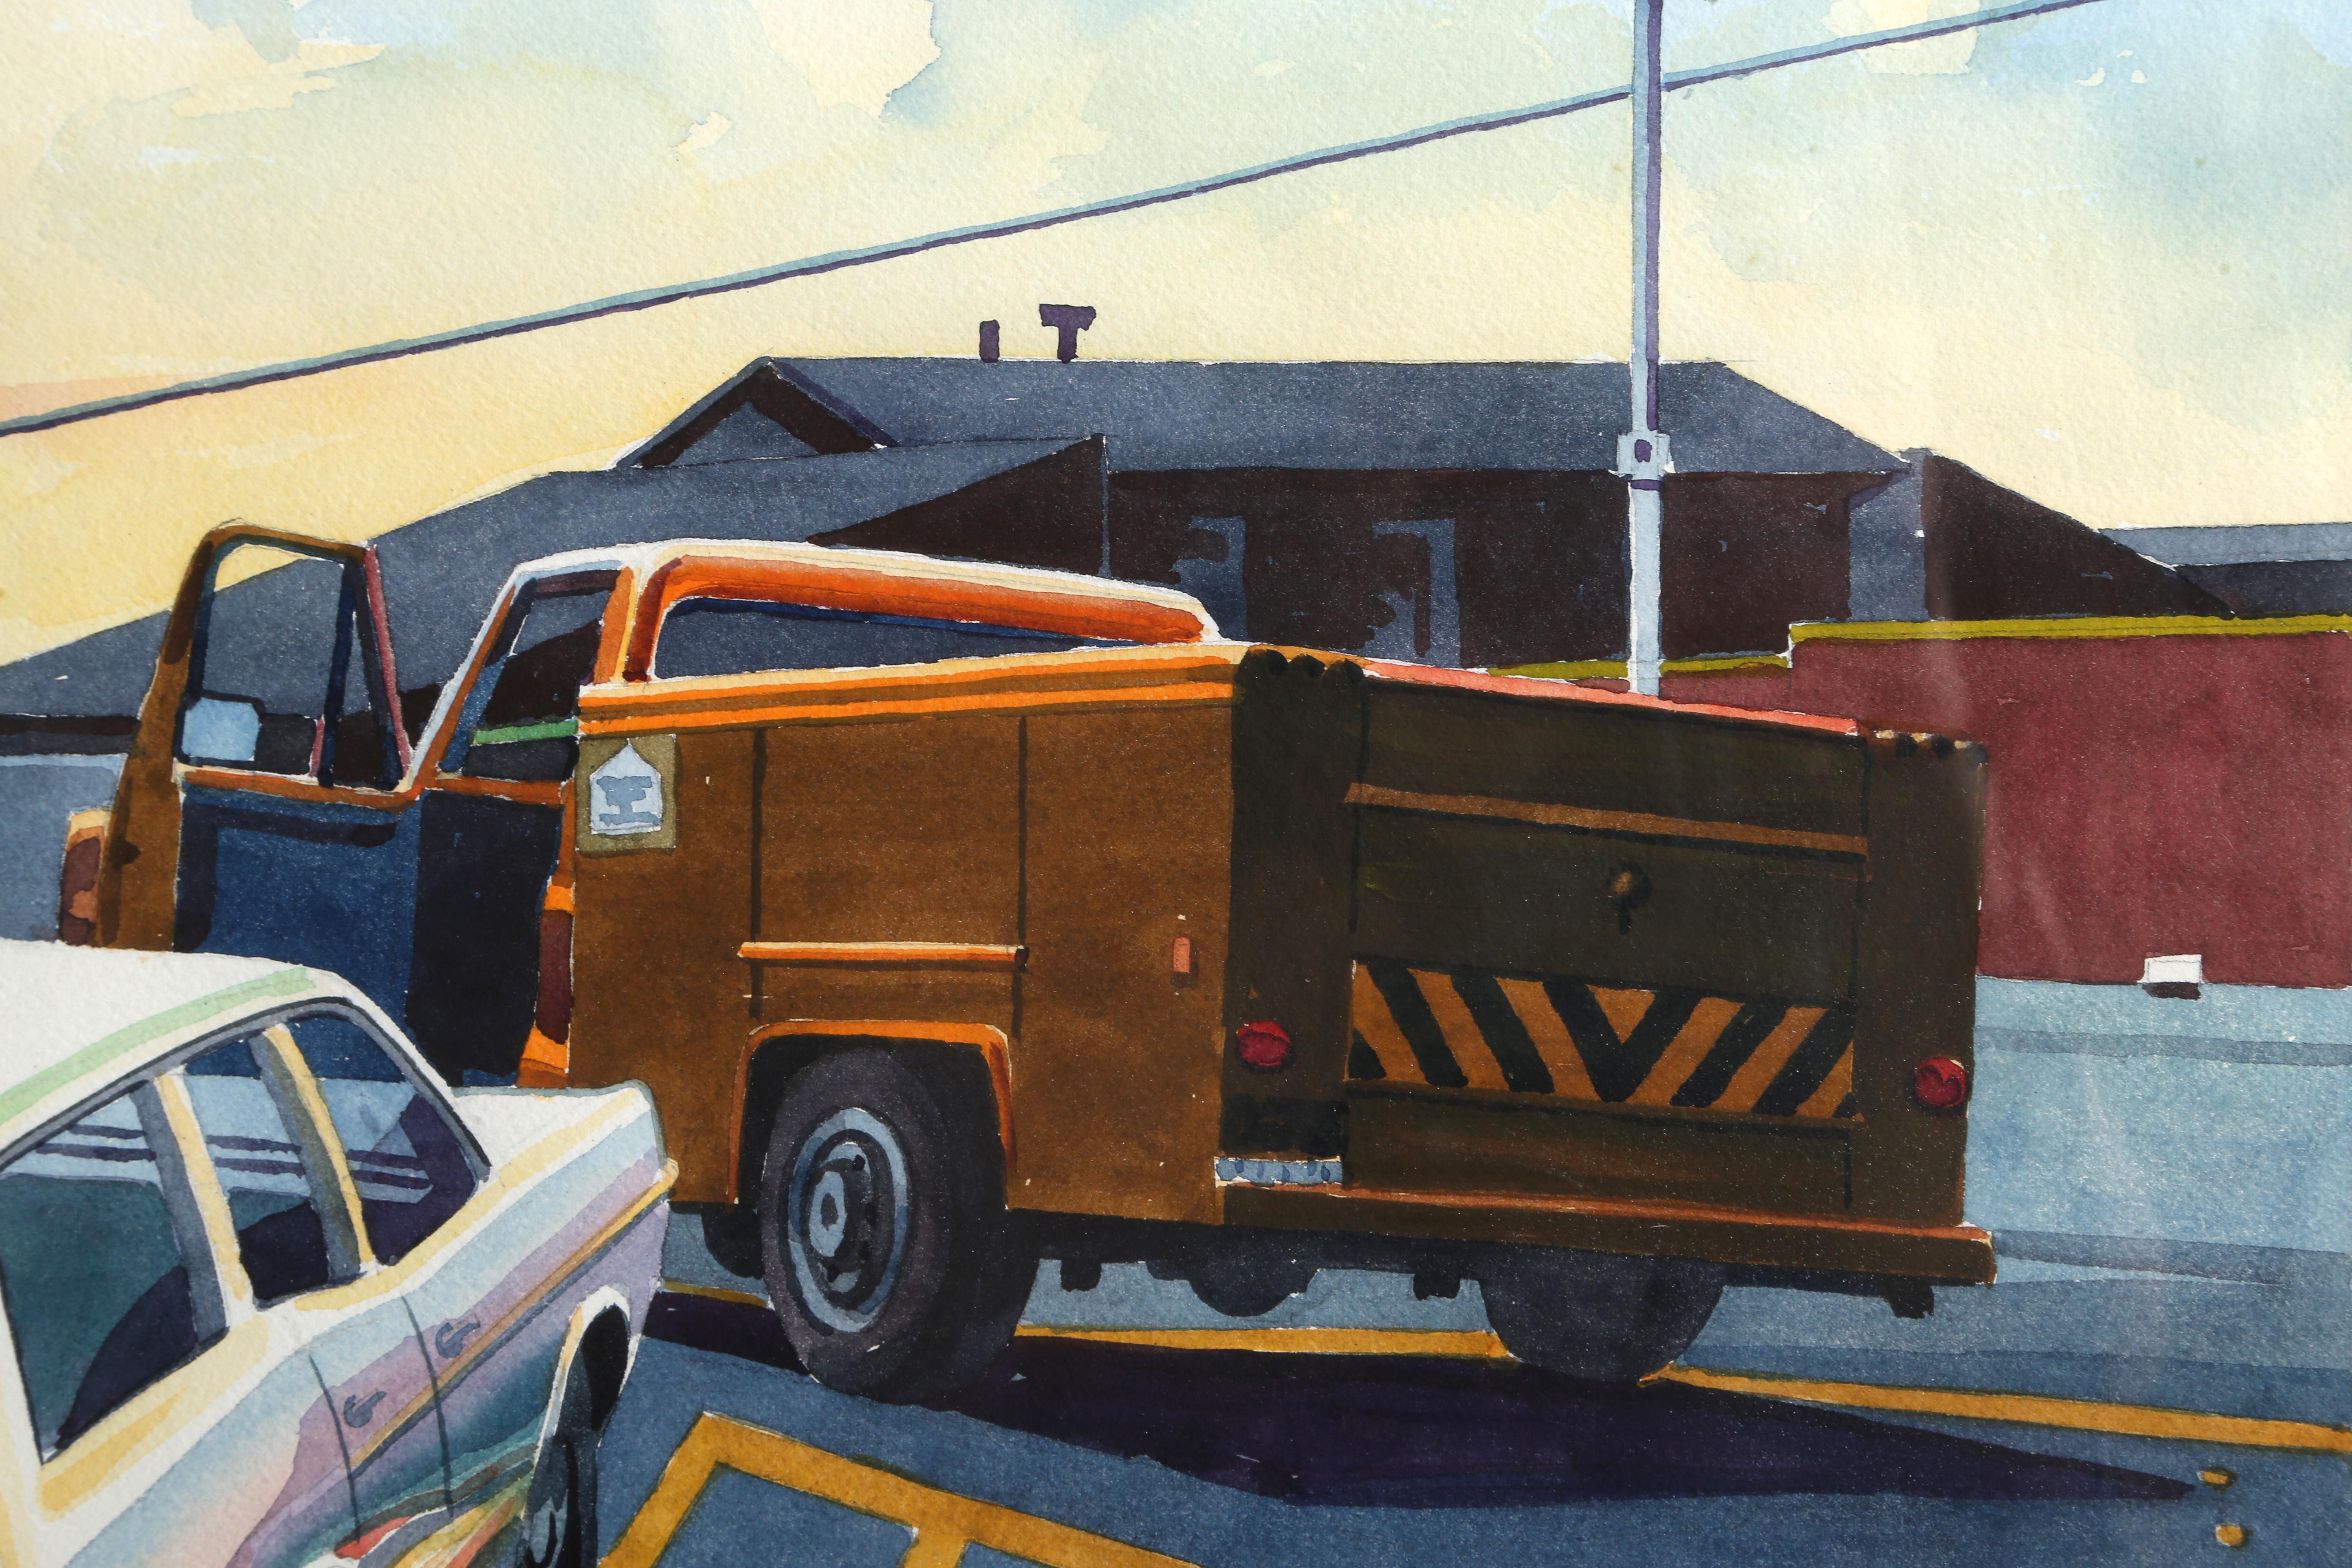 Dodge and Truck, New York City - Art by Don David